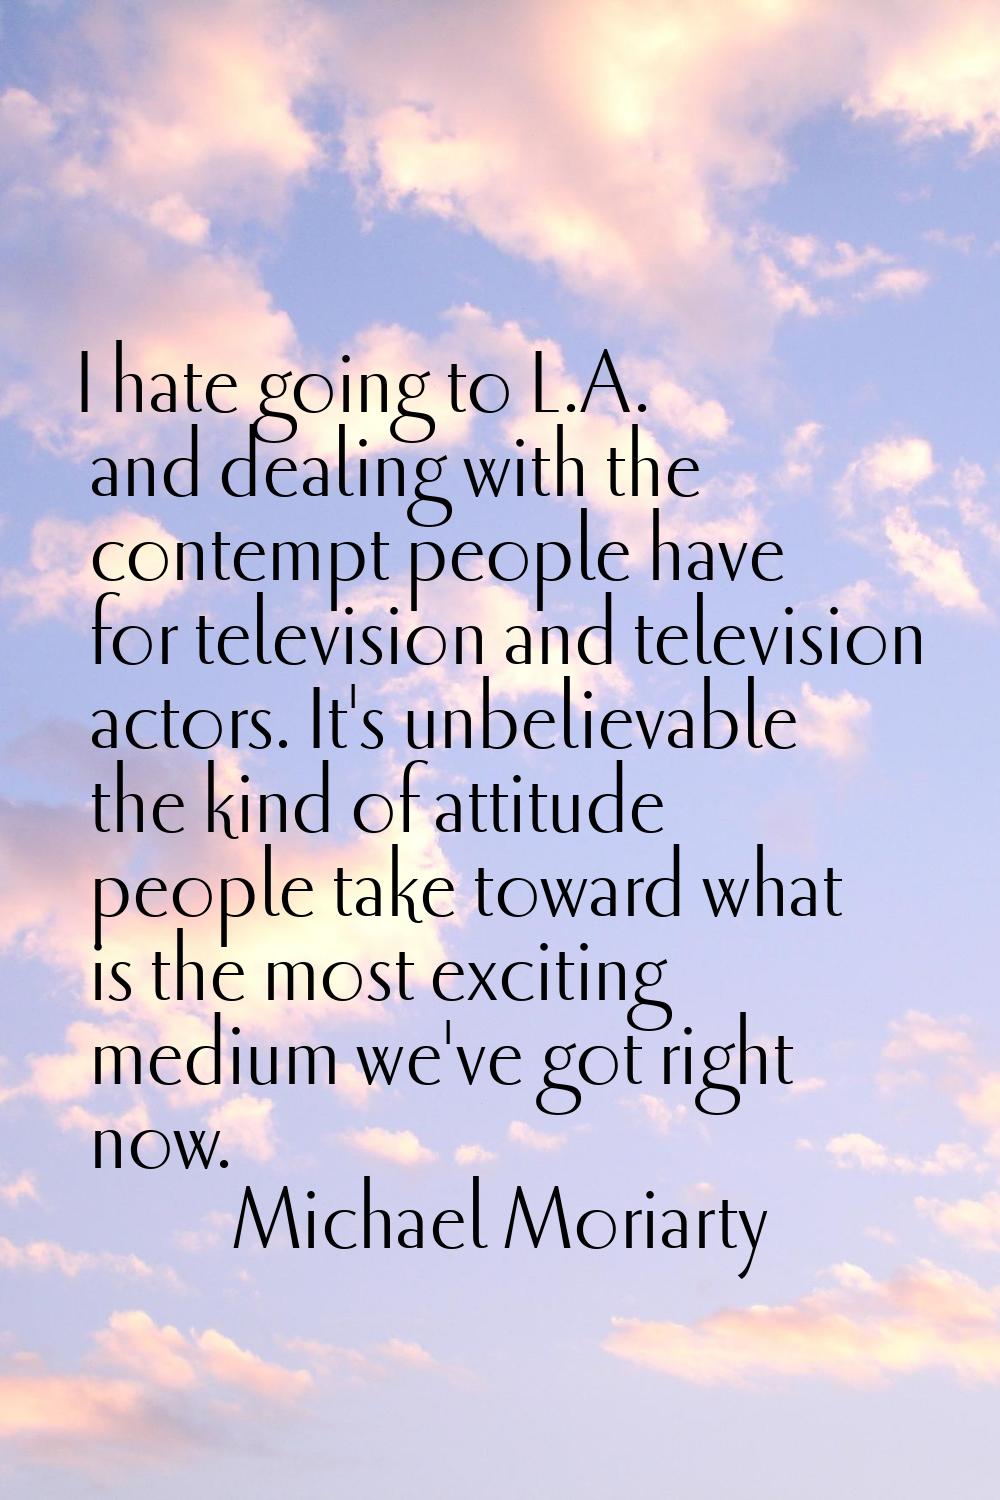 I hate going to L.A. and dealing with the contempt people have for television and television actors